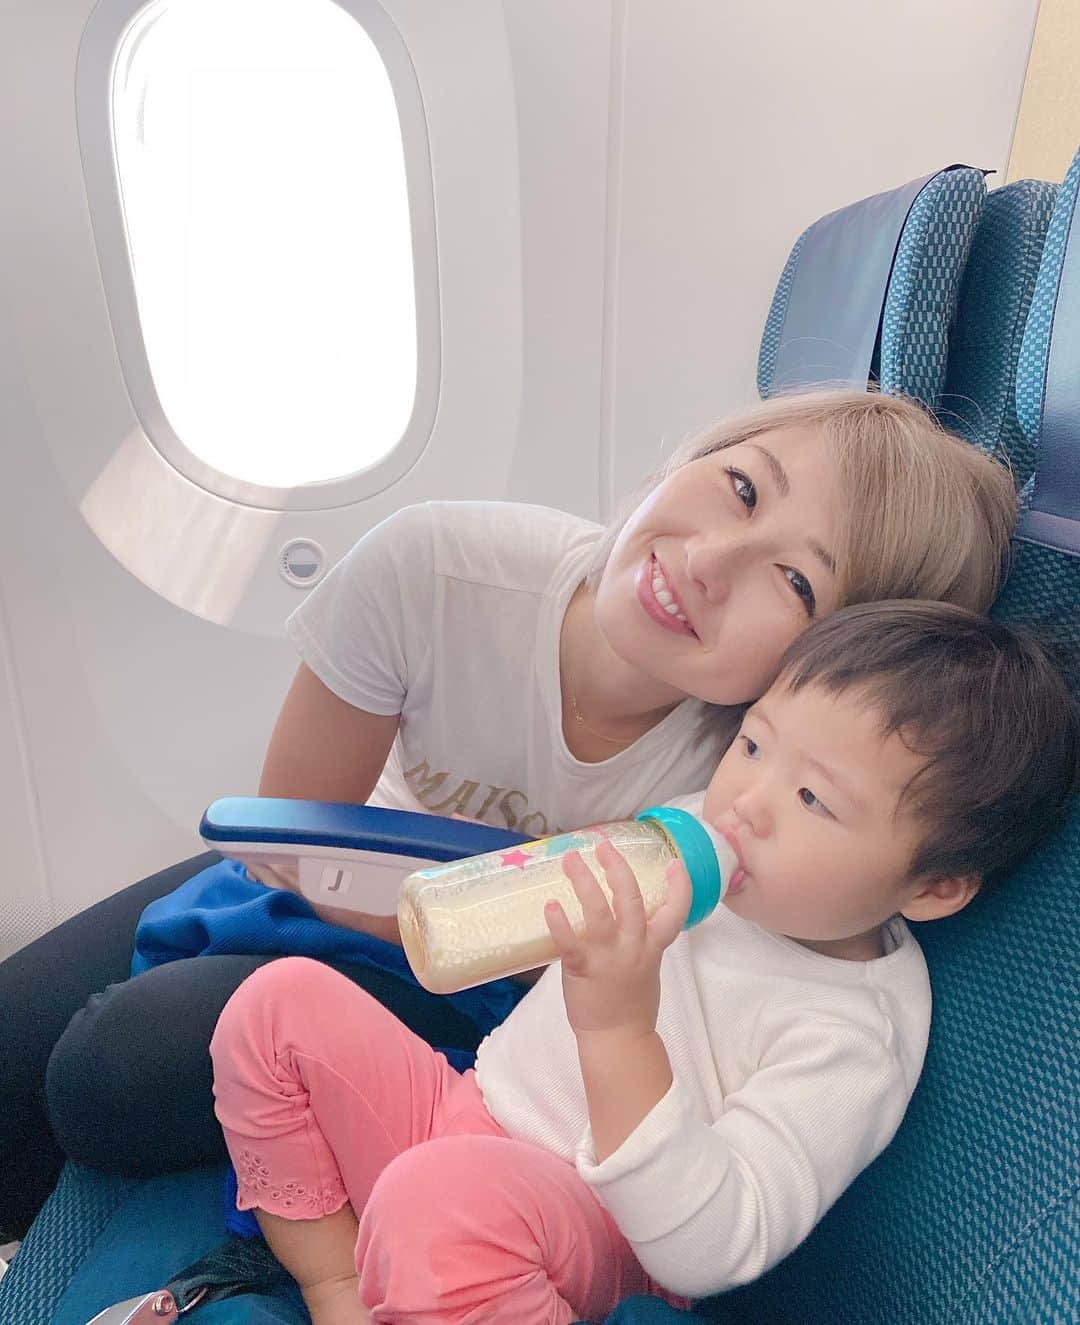 吉田ちかさんのインスタグラム写真 - (吉田ちかInstagram)「Had a surprisingly pleasant 6 and a half hour flight back to Tokyo! It was a daytime flight so I was worried about Pudding turning into a little monster, but she was an absolute angel! Watched her favorite movie Sing for a bit then took a 3 hour nap (stayed up late because of it, but oh well) and woke up very happy. She ate her baby meal and before we knew it we were back in Japan!﻿ ﻿ Today we went to visit my grandma who is doing really well! We’ve got a busy weekend ahead and with Pudding not having a daycare to go to I don’t know how I’m going to find time to edit, but I have a lot more to share so bear with me! A video of our Singapore trip in collaboration with Klook is coming up for you on Sunday! ﻿ ﻿ びっくりするぐらい平和な6時間半のフライトで東京に戻りました！日中のフライトだったのでモンスタープリンと戦う覚悟で乗ったのですがw 信じられないほどいい子でエンジェルプリンでした😇💕　大好きな映画「SING」をちょっと観て、いつもの3倍の昼寝をしてくれて(夜はなかなか寝ませんでしたが😅) 、超ご機嫌に目を覚ましベビーミールをしっかり食べたら、あら！もう着いた！昼寝中に書籍の原稿も結構書けて、はかどりました😊﻿ ﻿ 今日は、grandmaに会いに茅ヶ崎へ。週末も忙しくなりそうでプリンのデイケアもないのでどうやって編集をするのか😅でも、まだまだシェアすることが沢山あるので、待っててください🙏日曜日には、以前Klookさんとのコラボで行ったシンガポール旅行の動画をアップ予定です！もちろん、KL動画もこれから沢山シェアします！﻿ ﻿ #ヘッドフォンは一瞬しただけw #大きすぎてズレまくり #プリン用のをゲットしないと🍮🎧💕 #バレンタインデーっぽいことは何もできず😅 #happyvalentinesday❤️」2月14日 22時22分 - bilingirl_chika